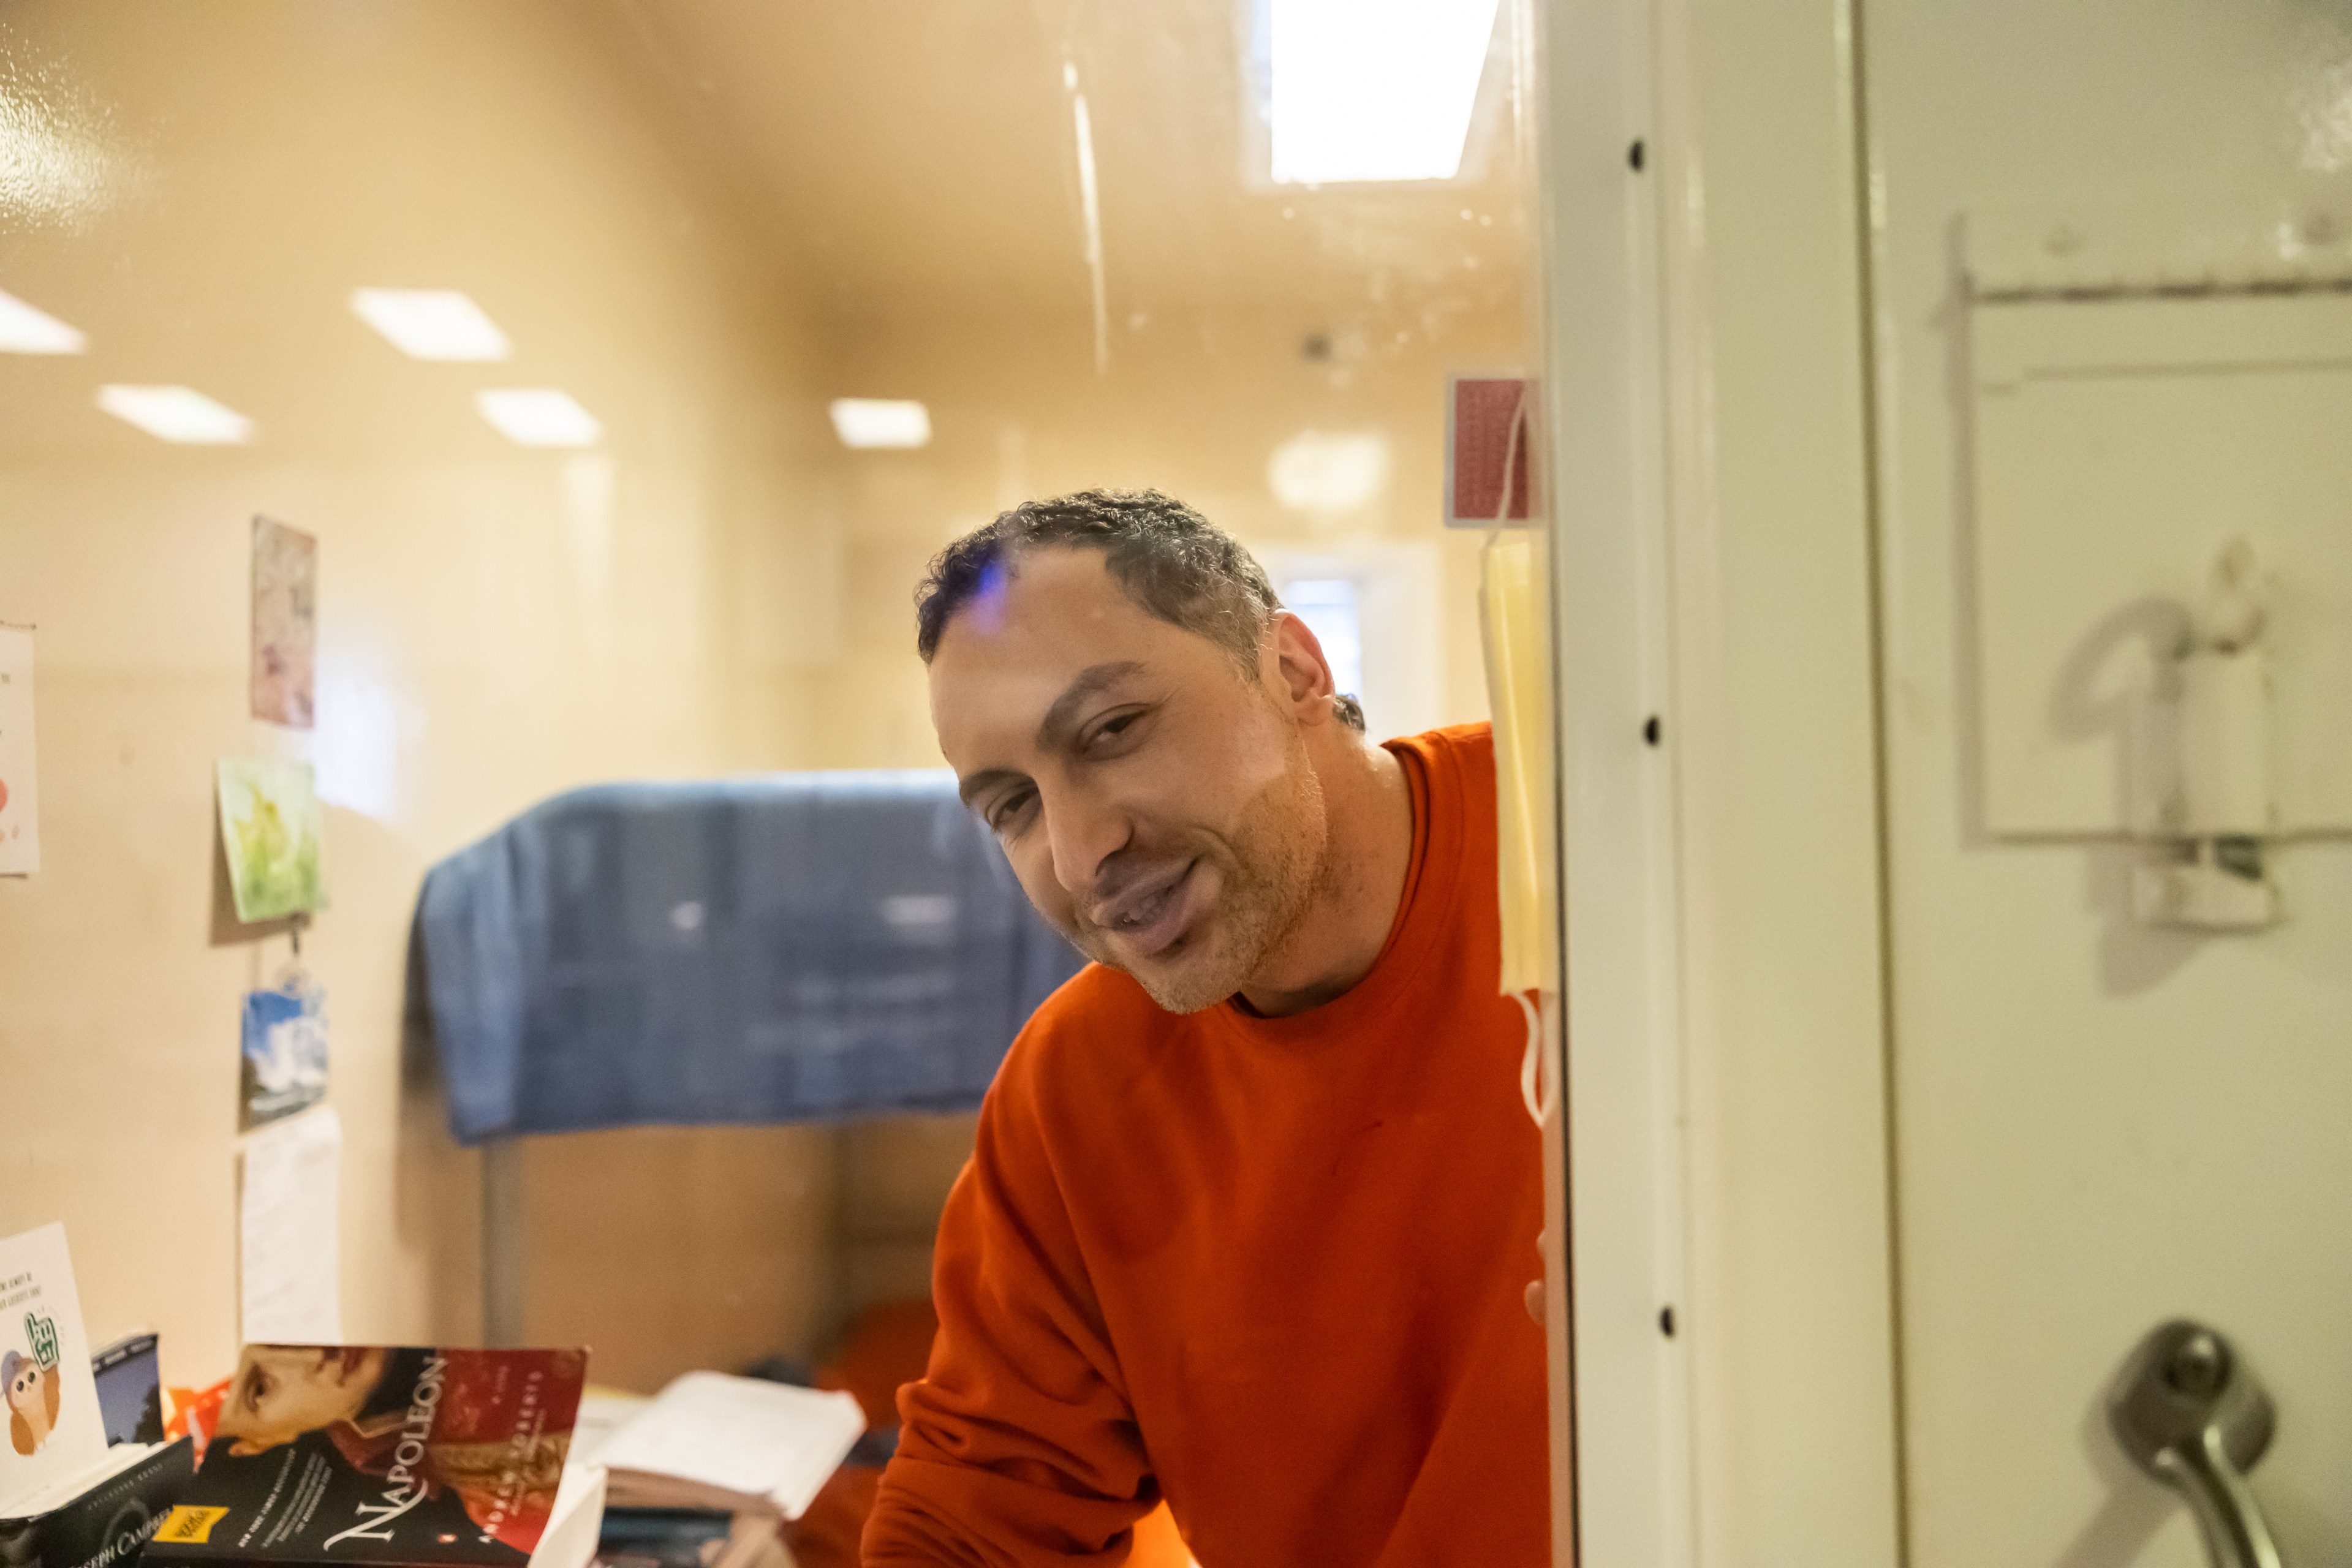 Jail inmate Nima Momeni, suspect for the killing of Cash App founder Bob Lee, while dressed in an orange sweatshirt smiles while looking out the window of his jail cell.